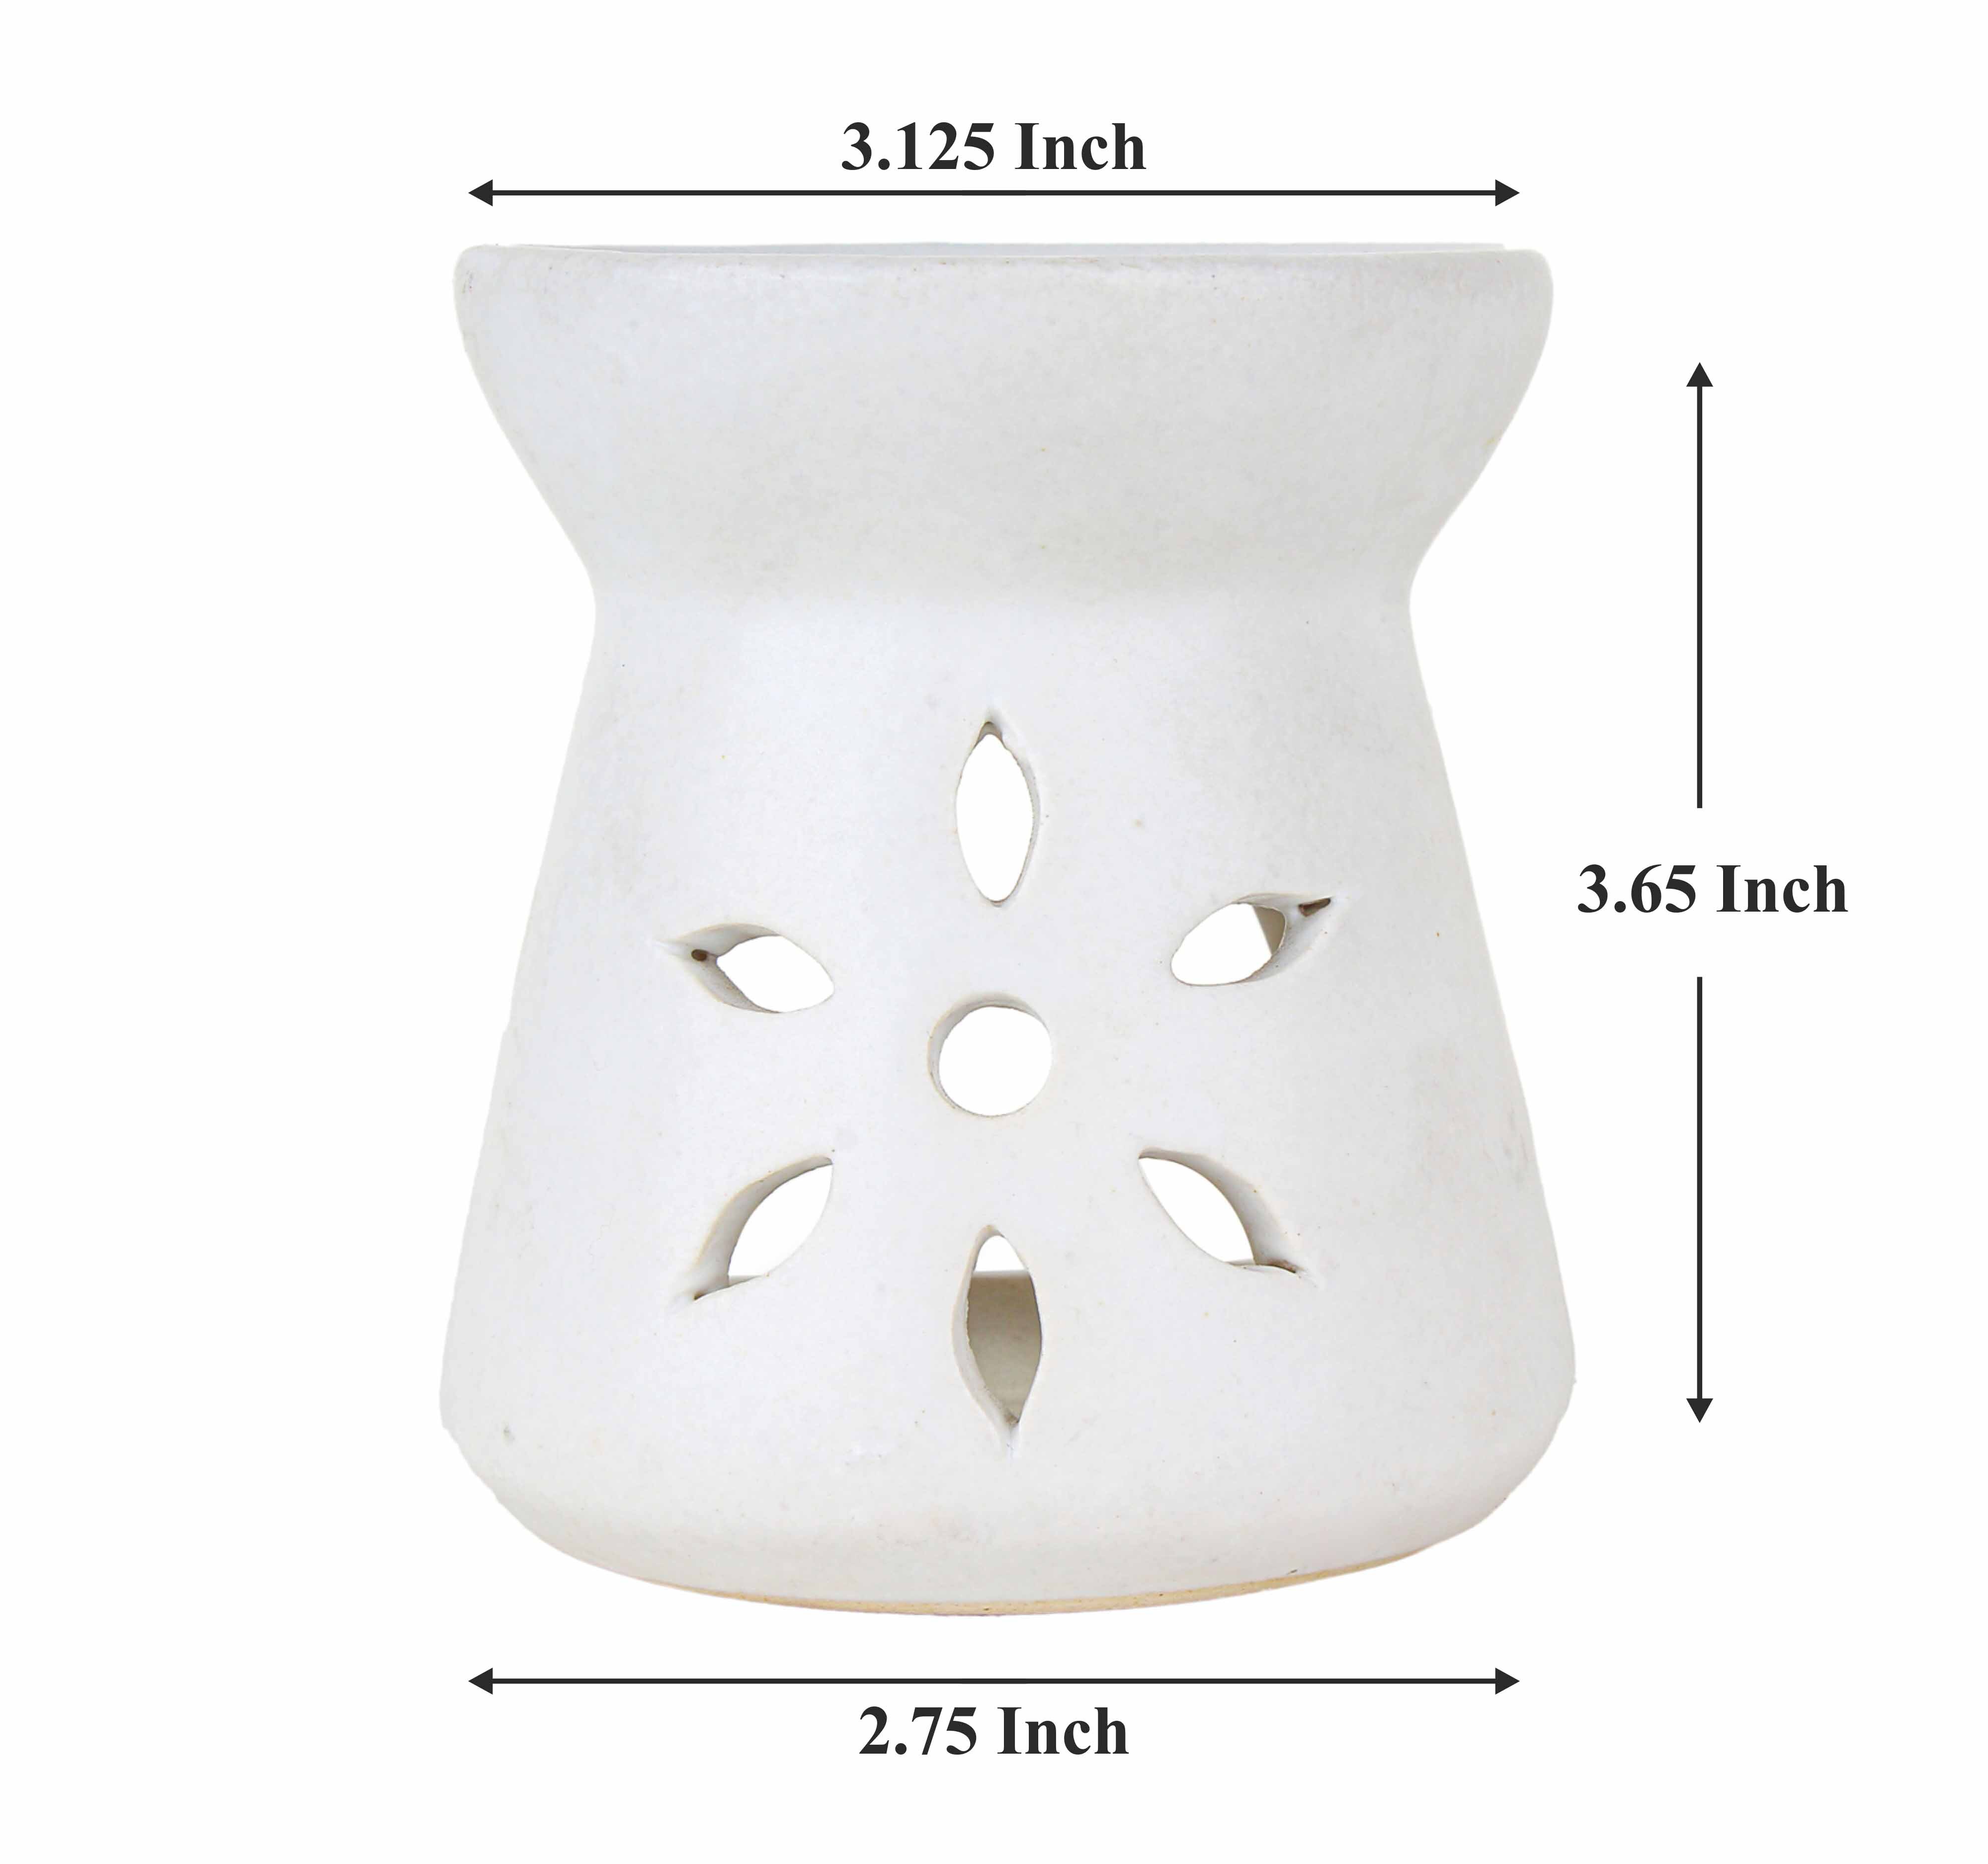 Asian Aura Ceramic Aromatic Oil Diffuser with 2 oil bottles AA-CB-00431 W